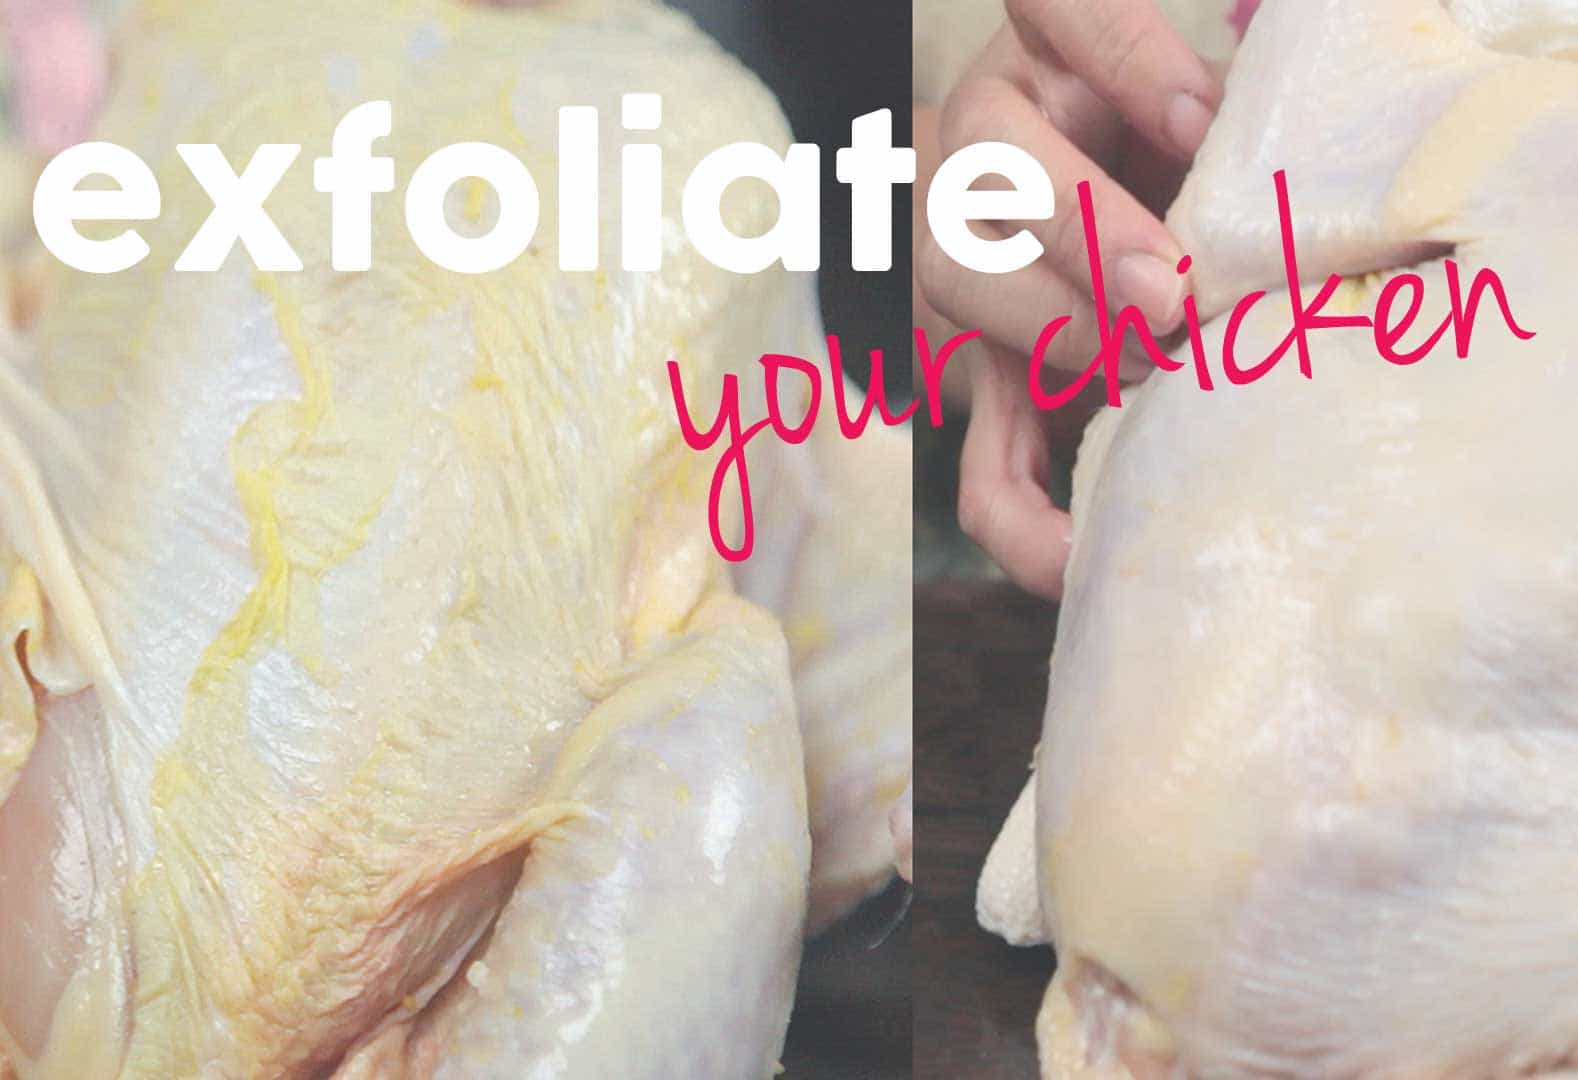 Exfoliate your chicken before cooking it!